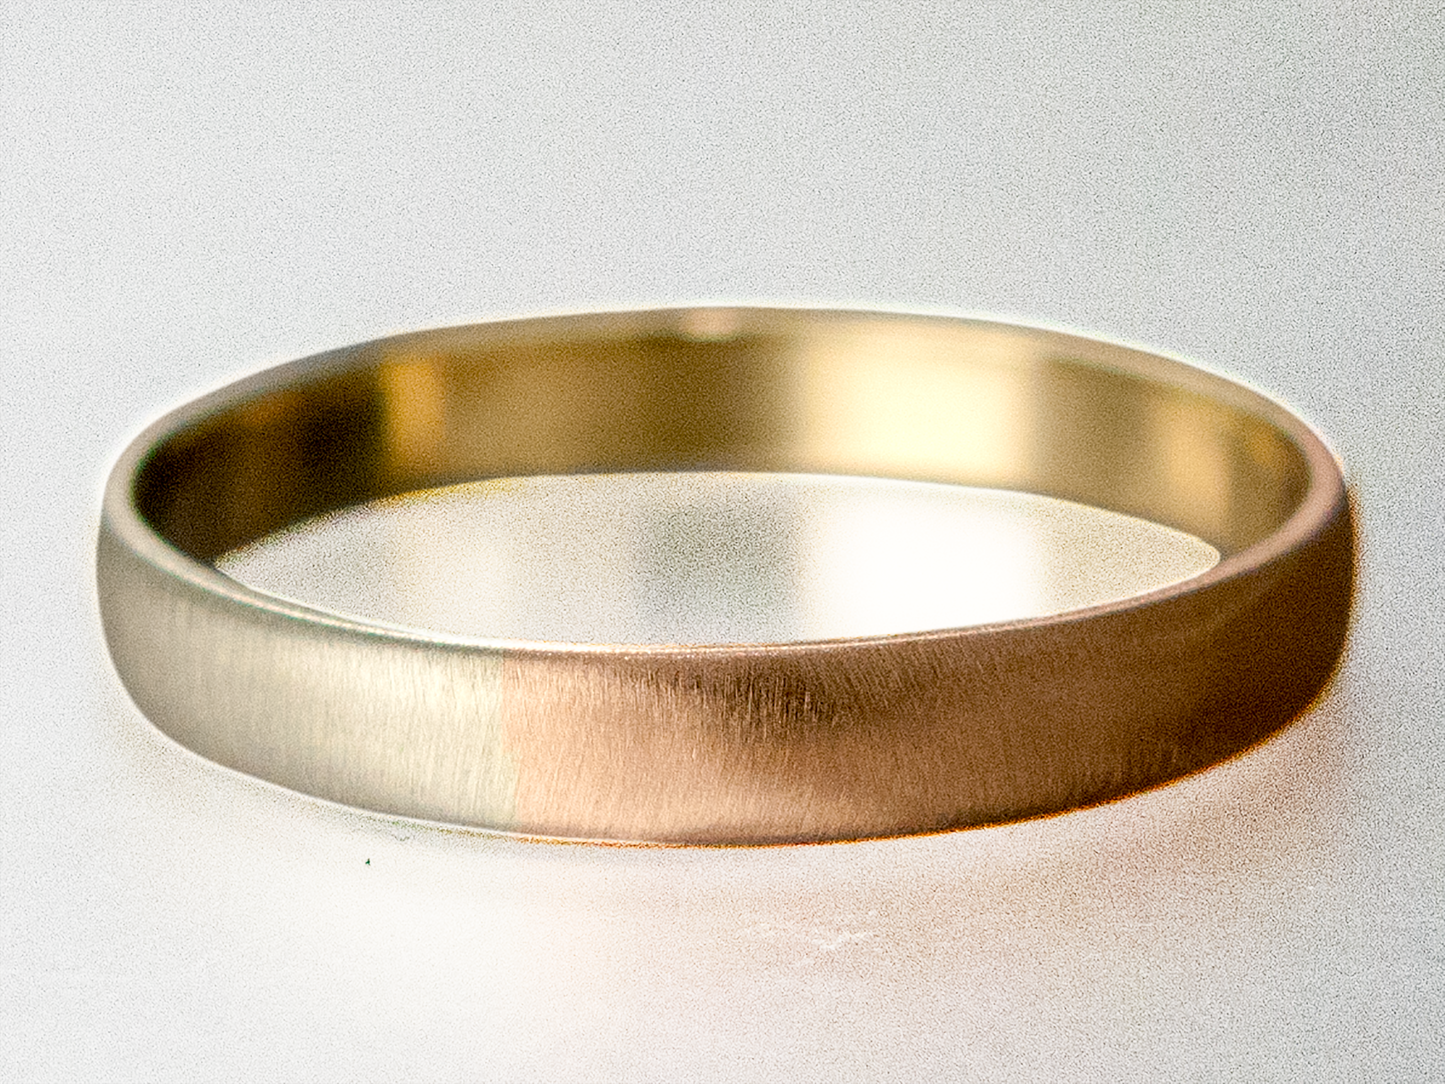 Mixed 14k Gold Wide Low Domed Wedding Band or Anniversary Ring in Yellow, White and Rose Gold, Past Present and Future